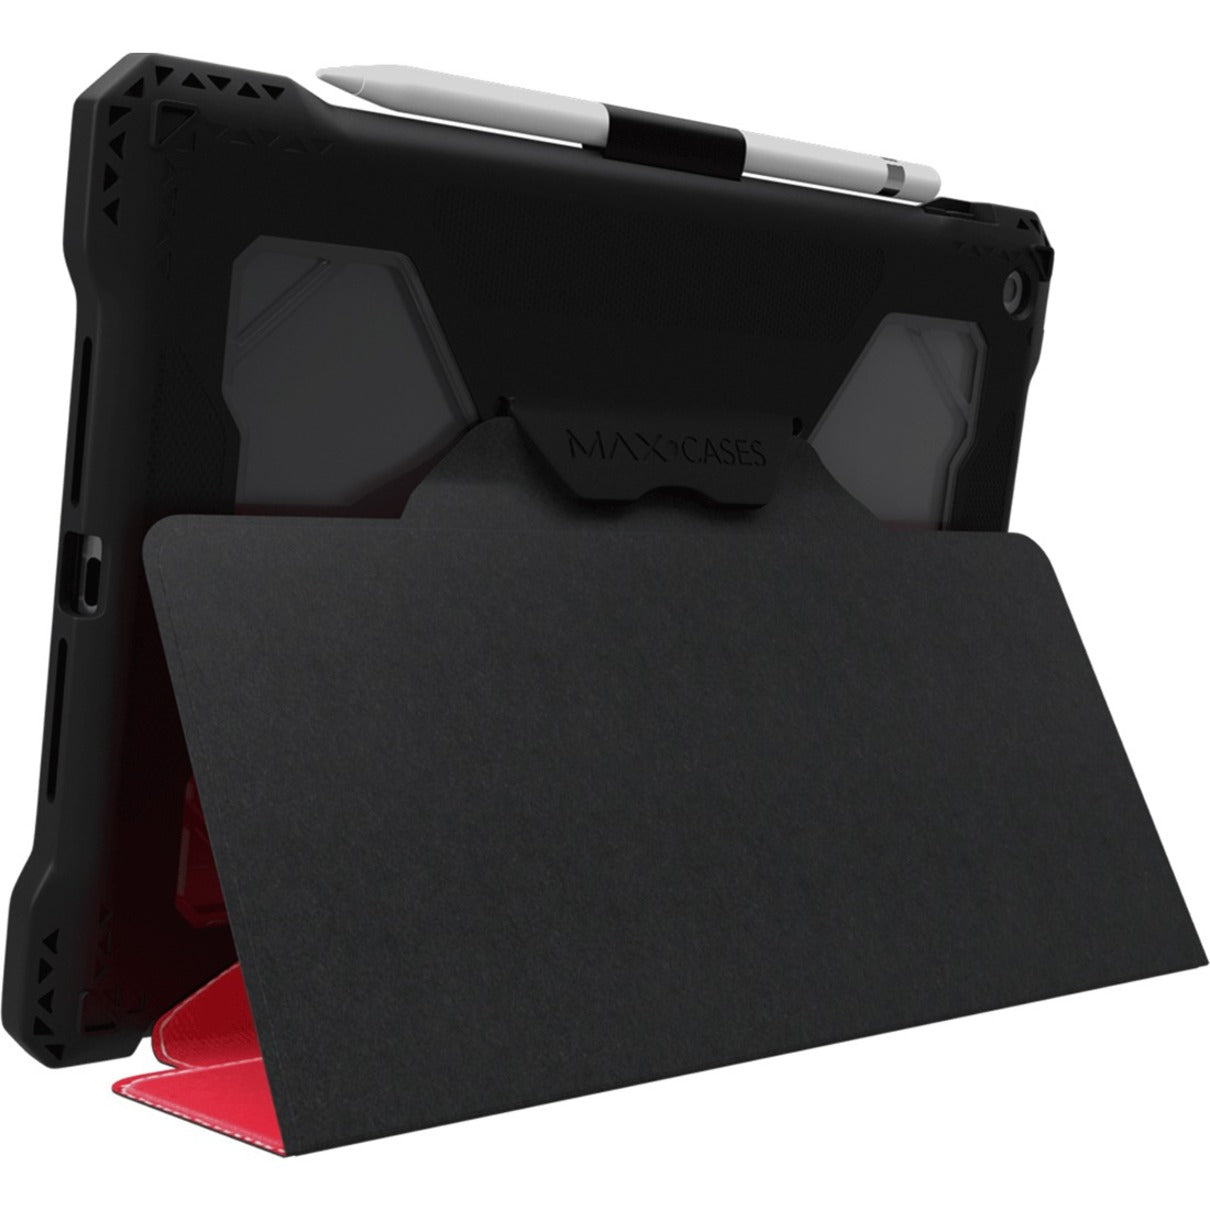 MAXCases Extreme Folio-X Rugged Carrying Case (Folio) for 10.2" Apple iPad Air (2019) Tablet - Red Clear